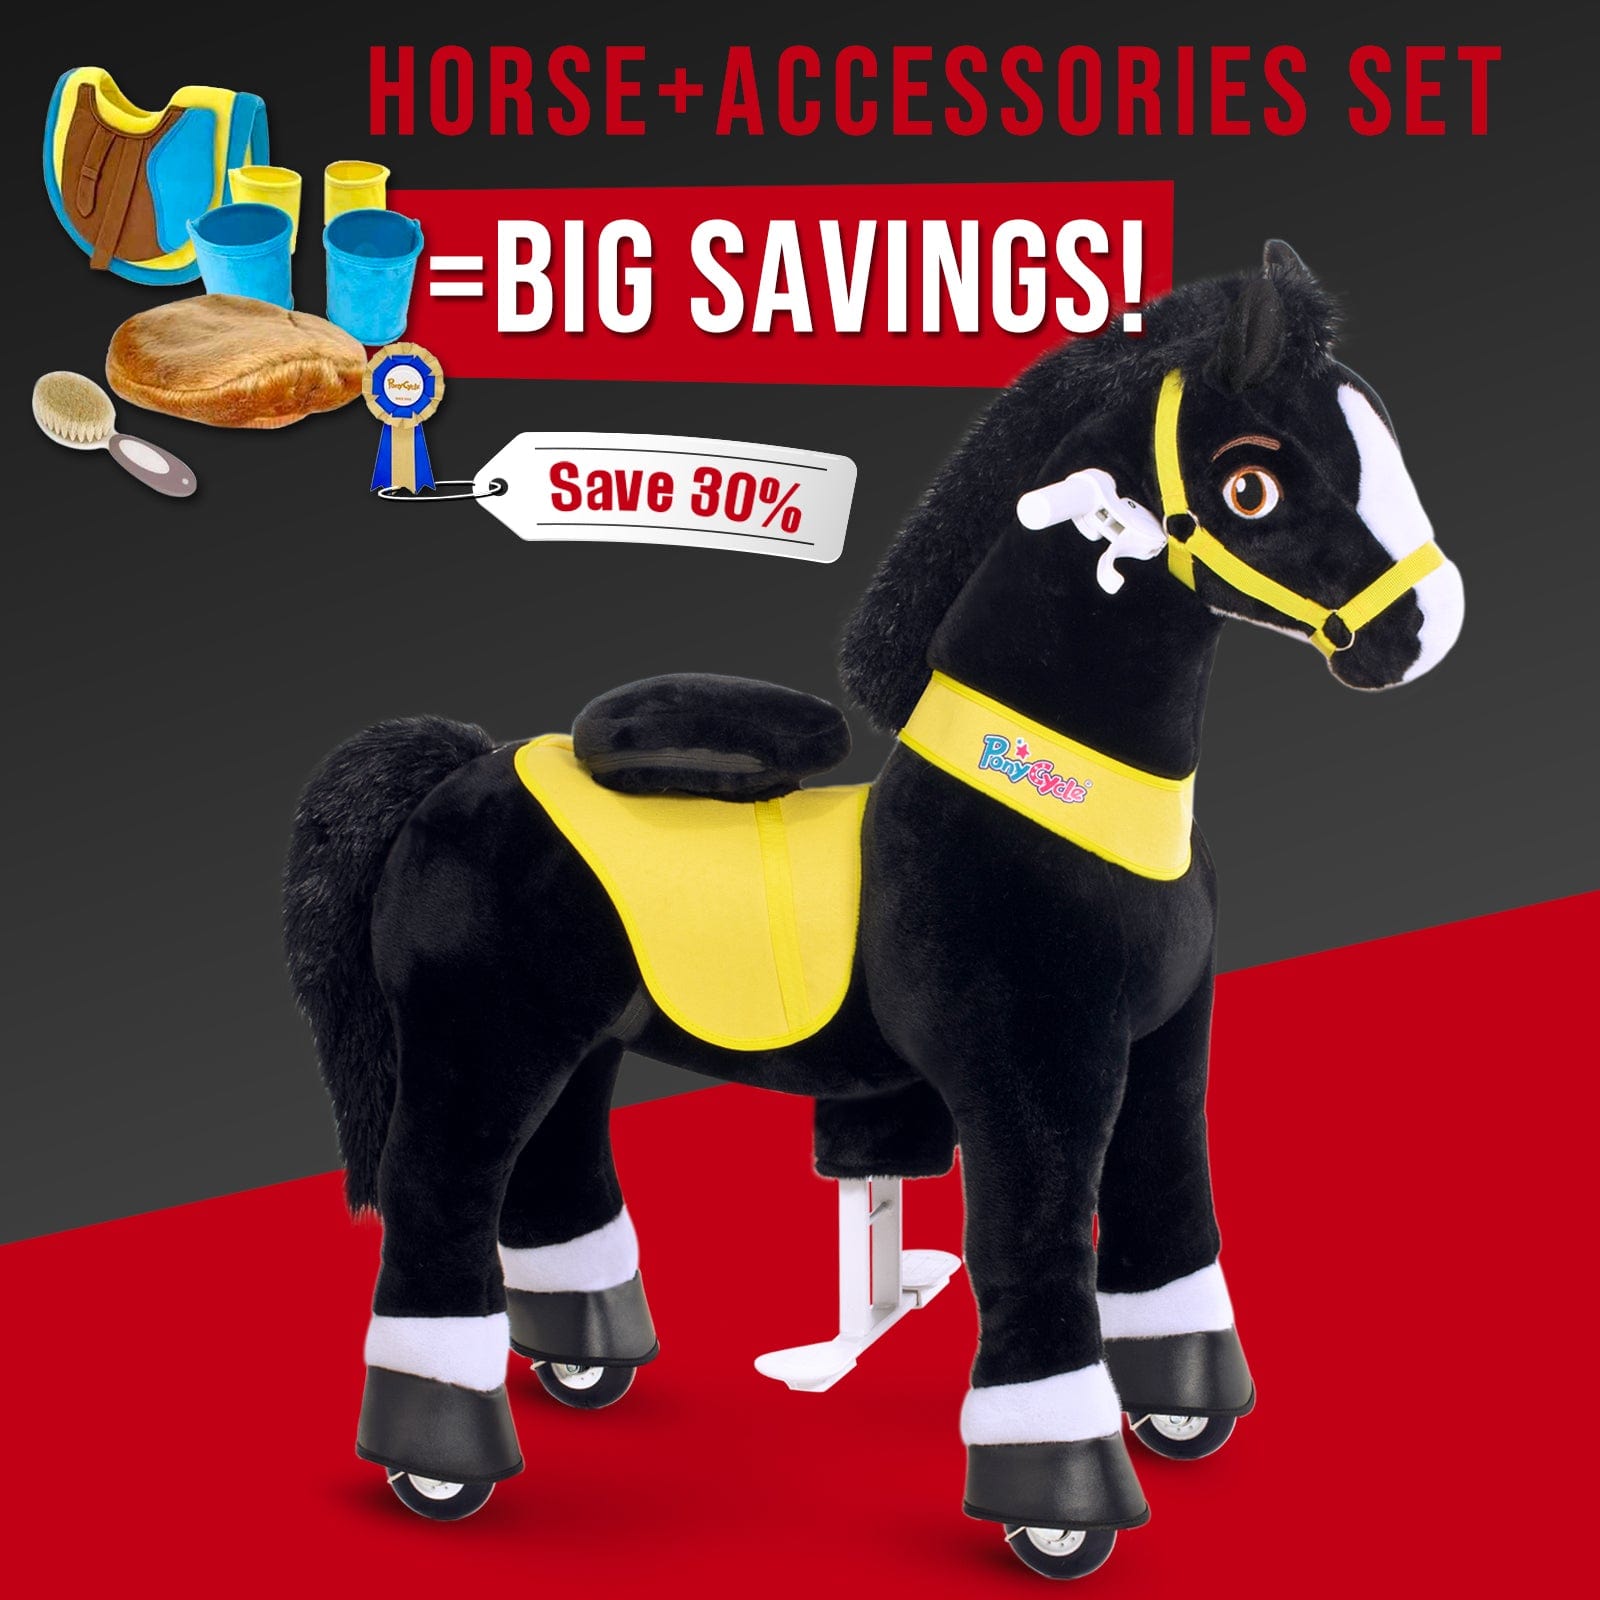 PonyCycle, Inc. ride on toy Save 30% on Blue Accessories Set - Model E Ride on Horse with Blue Accessories Set